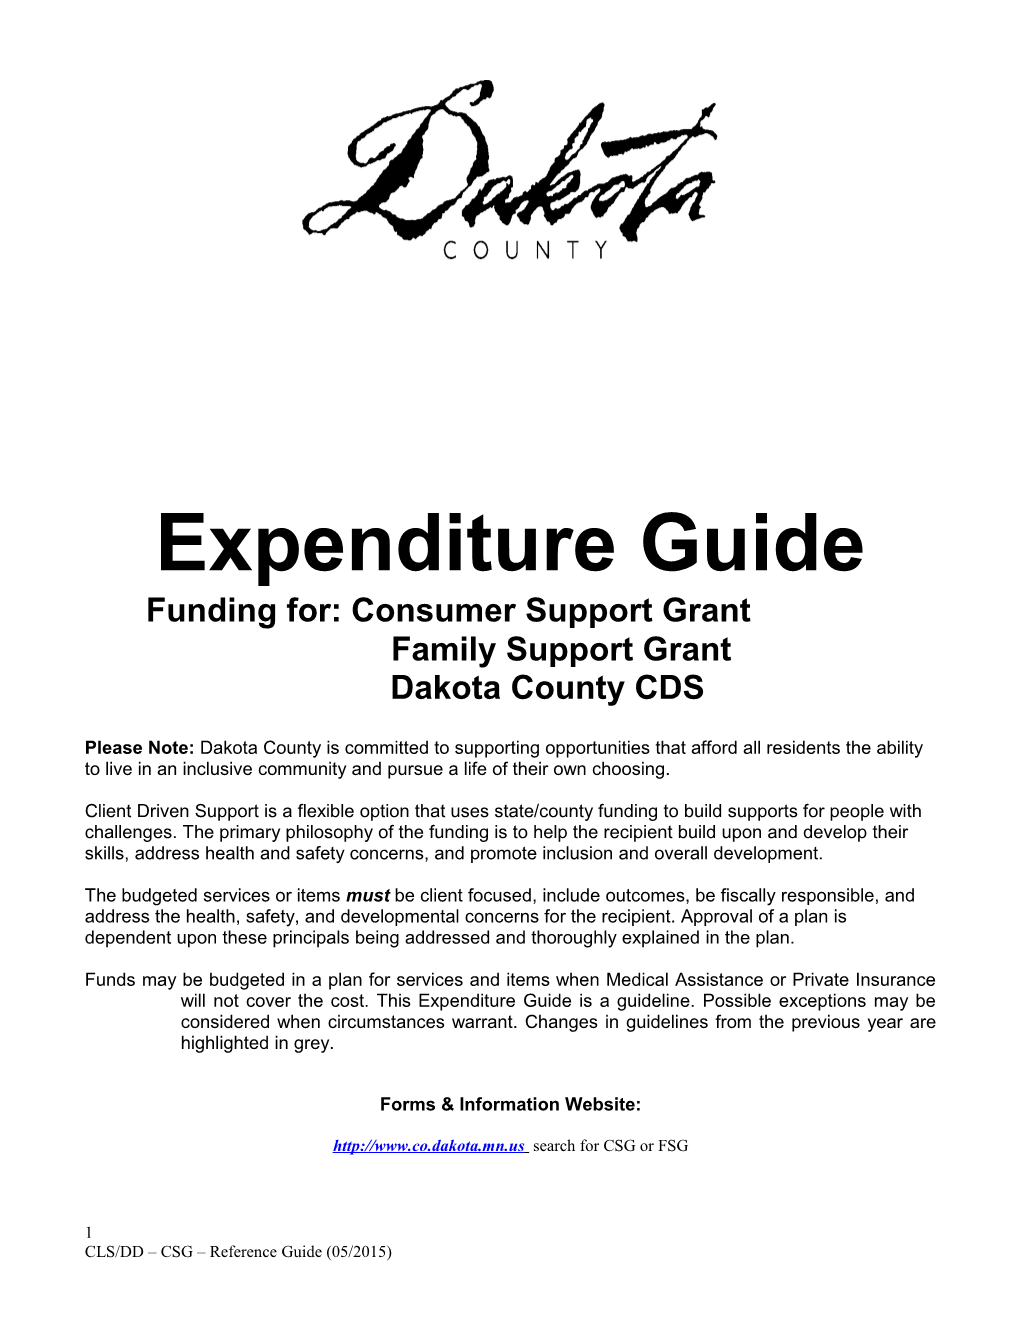 CDS Expenditure Guide